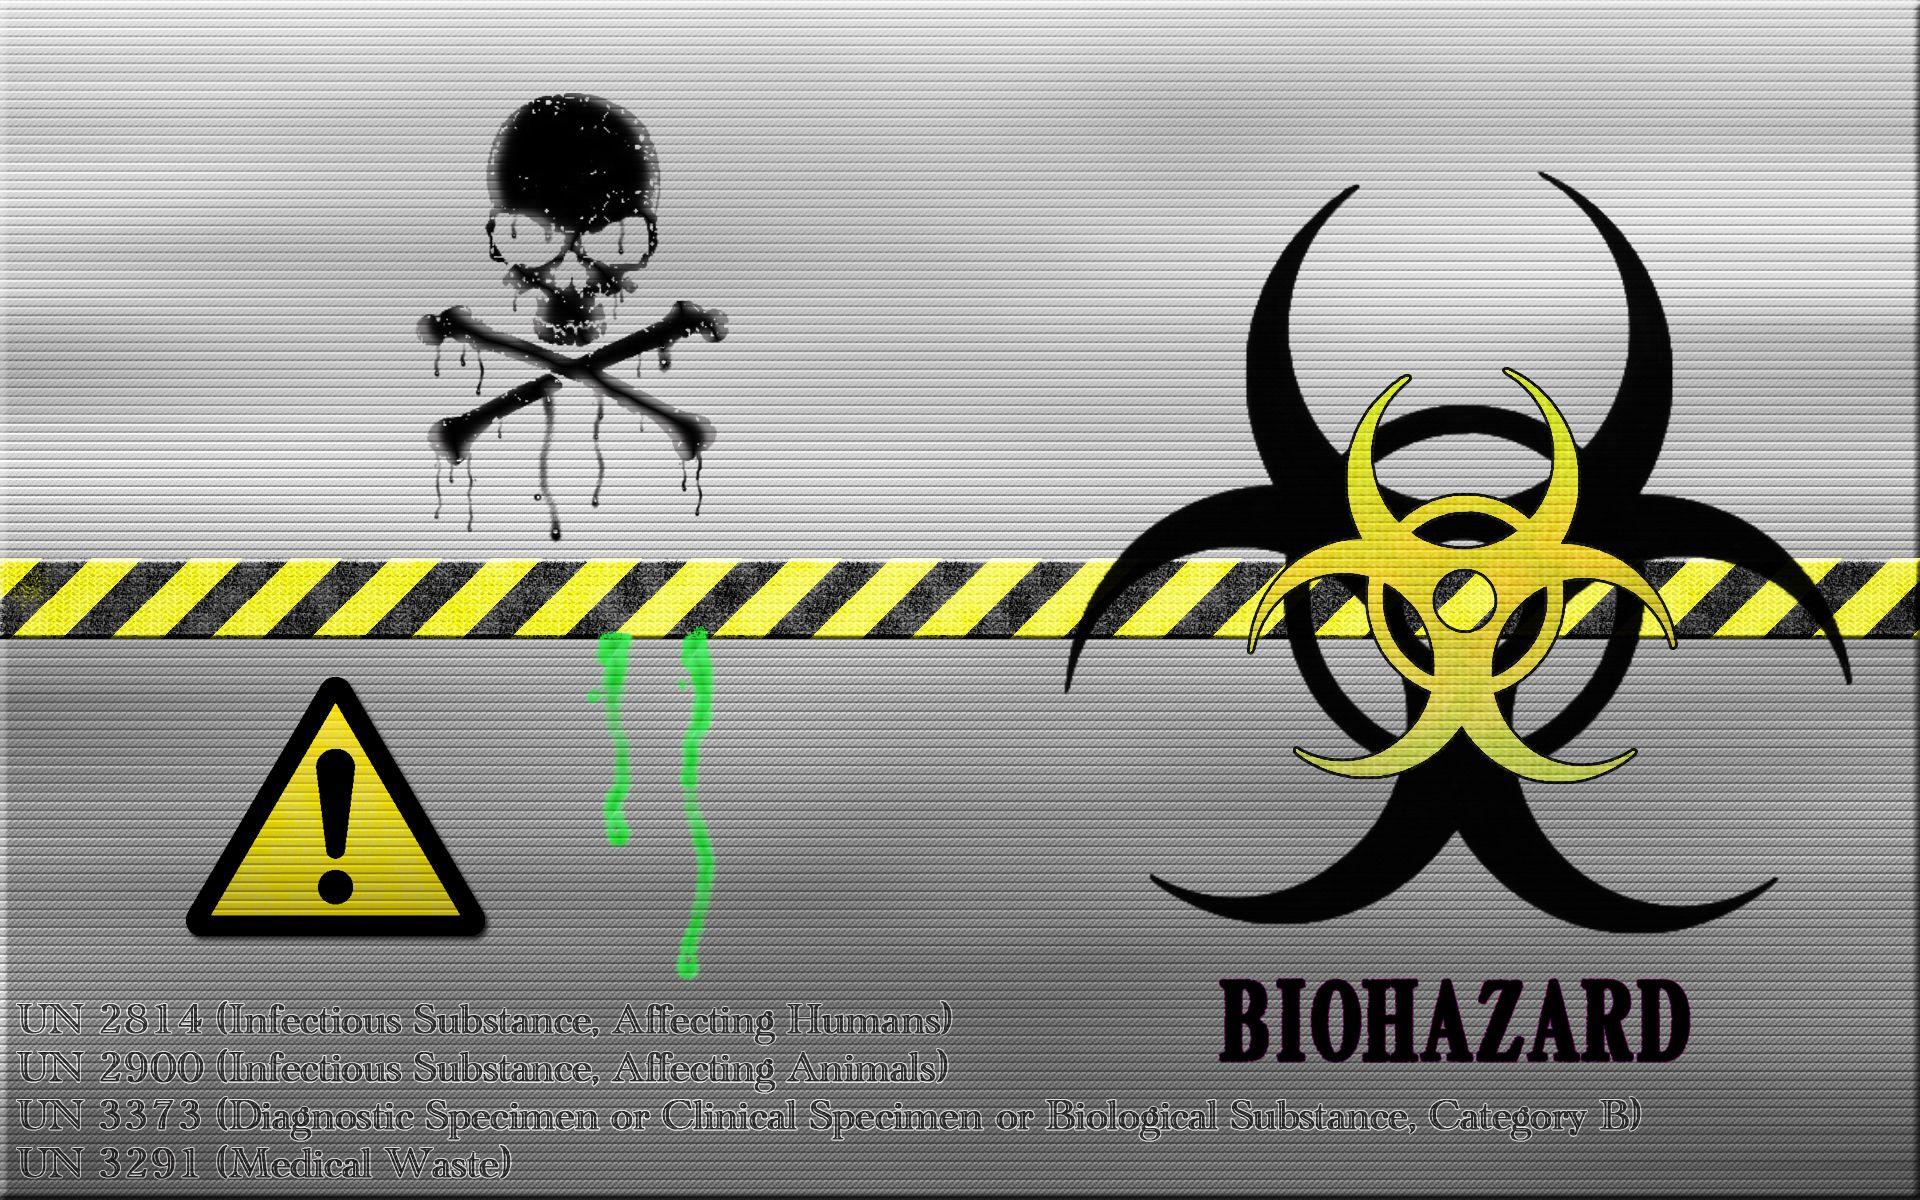 HDQ Cover Biohazard Background for Free